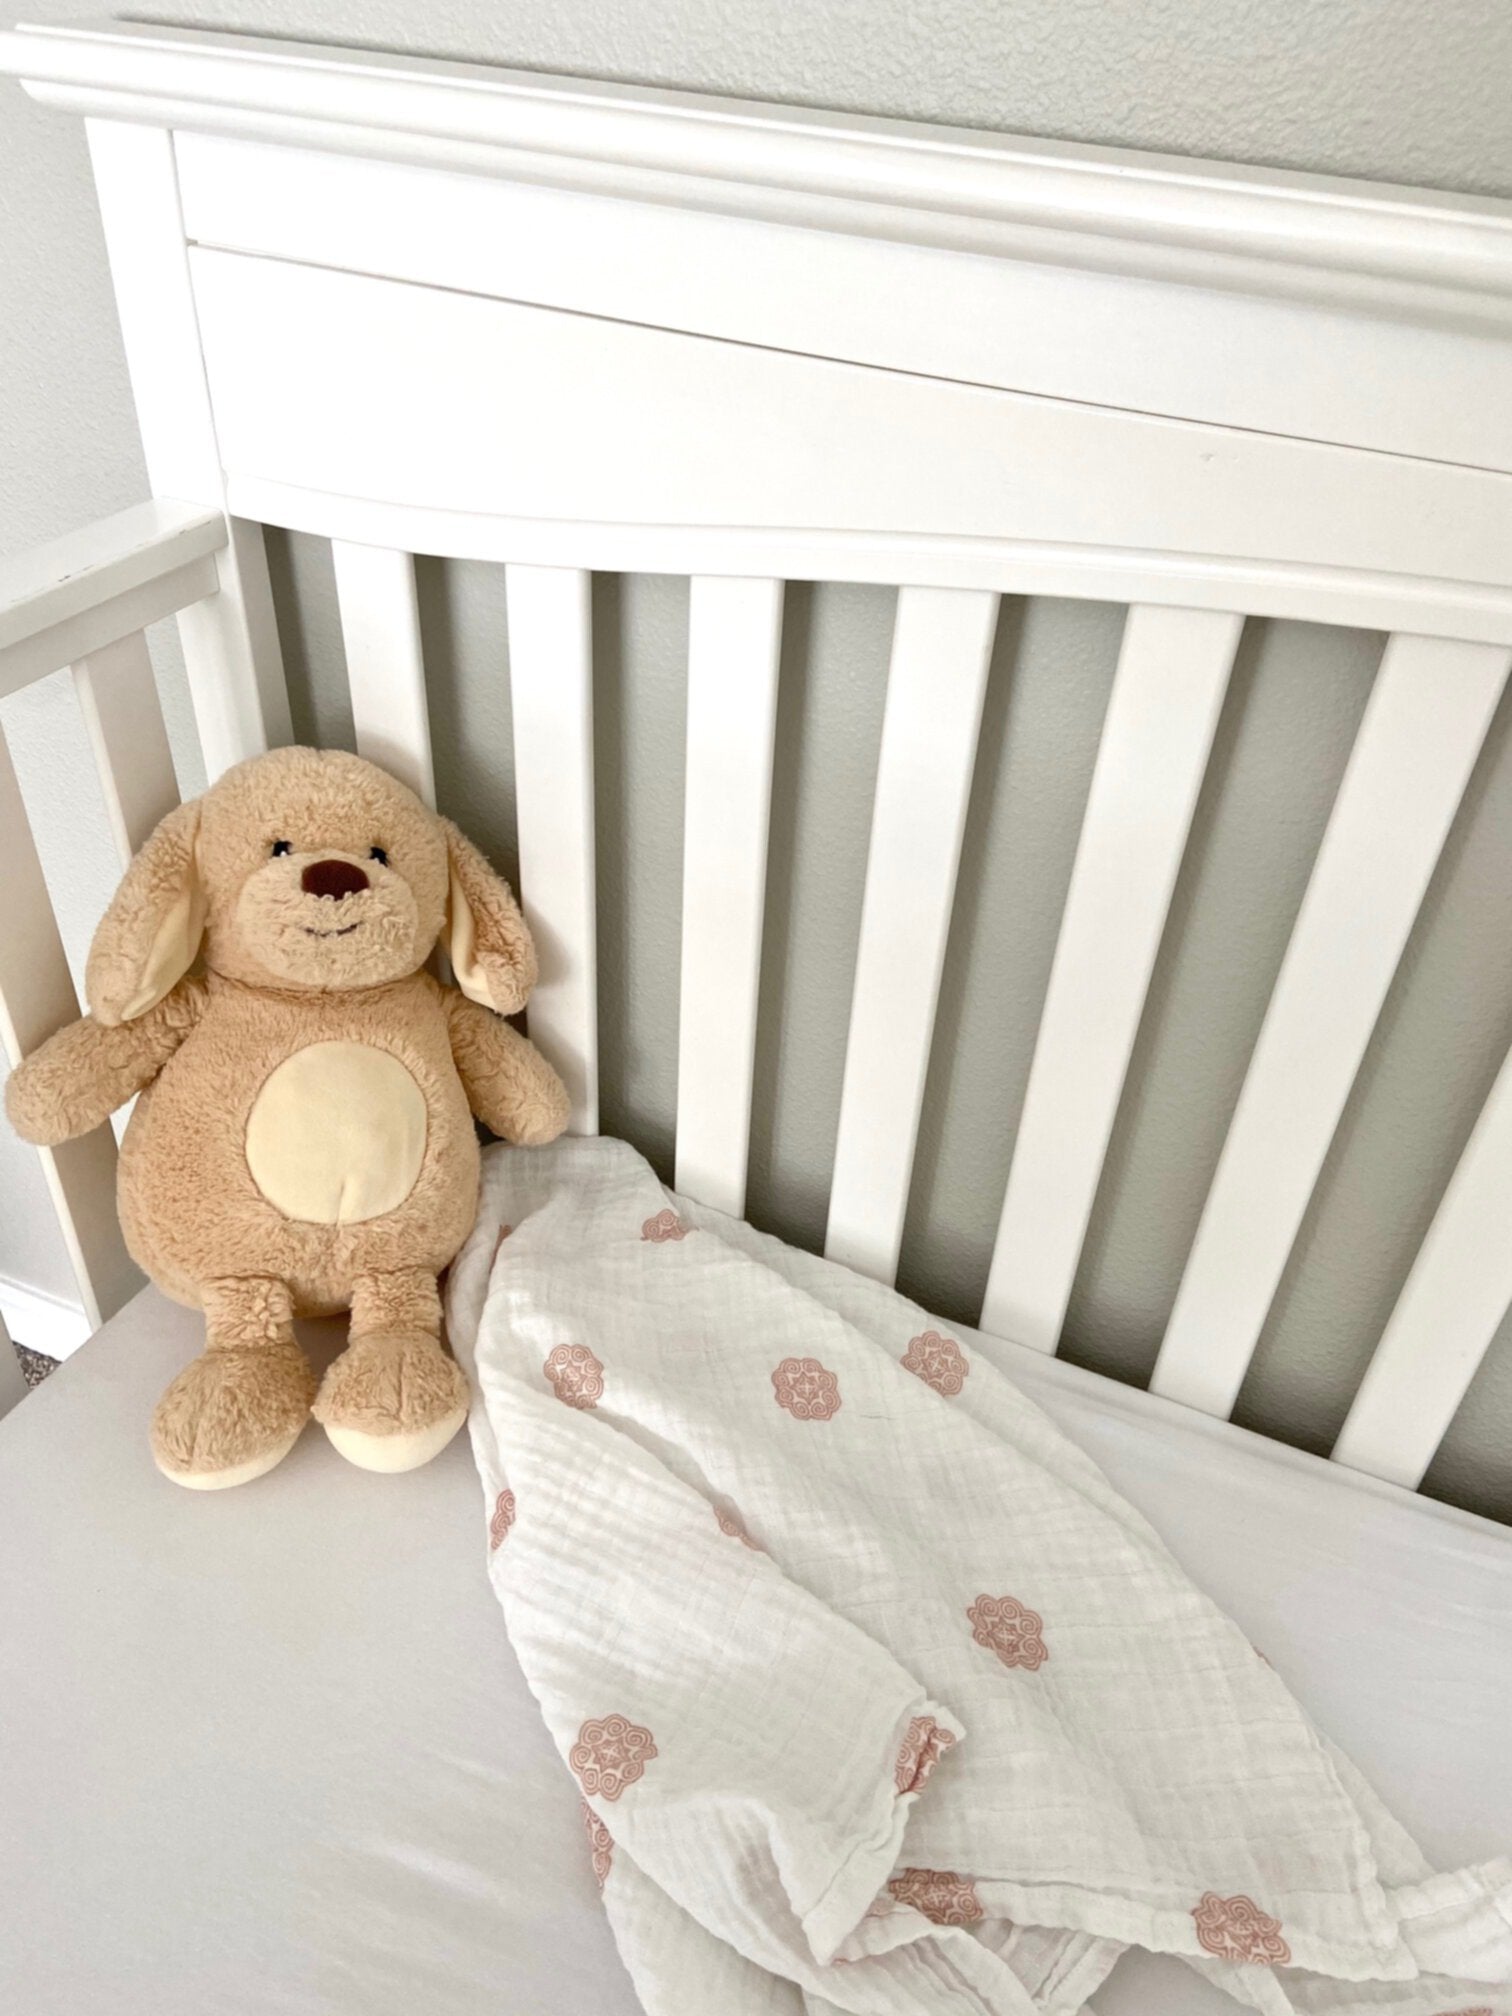 Muslin swaddle in a crib with a toy doll.